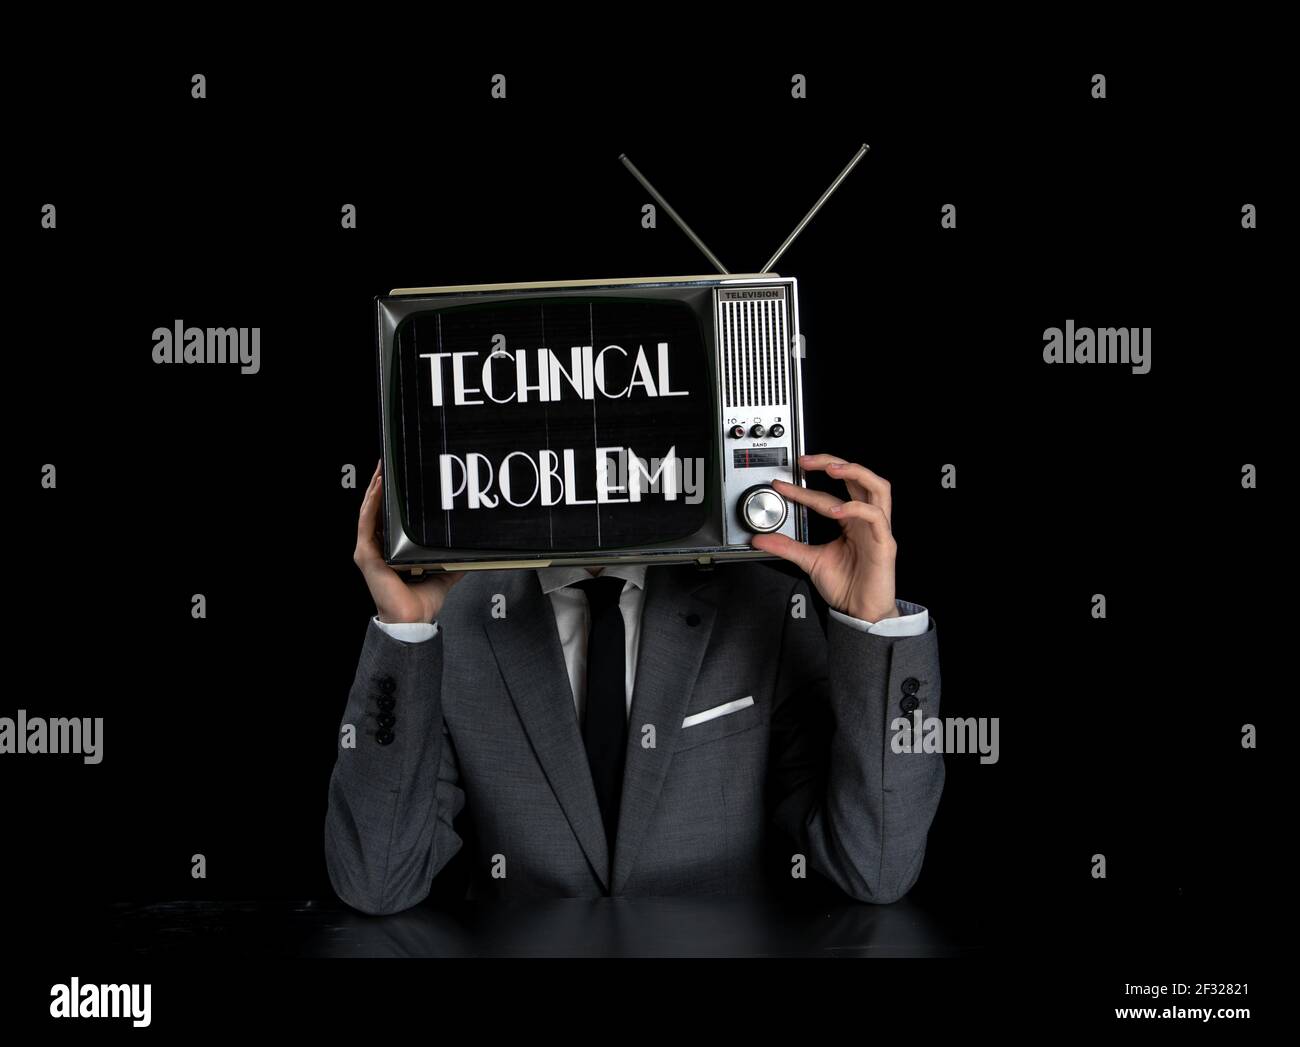 Man wearing suit with TV on head Stock Photo